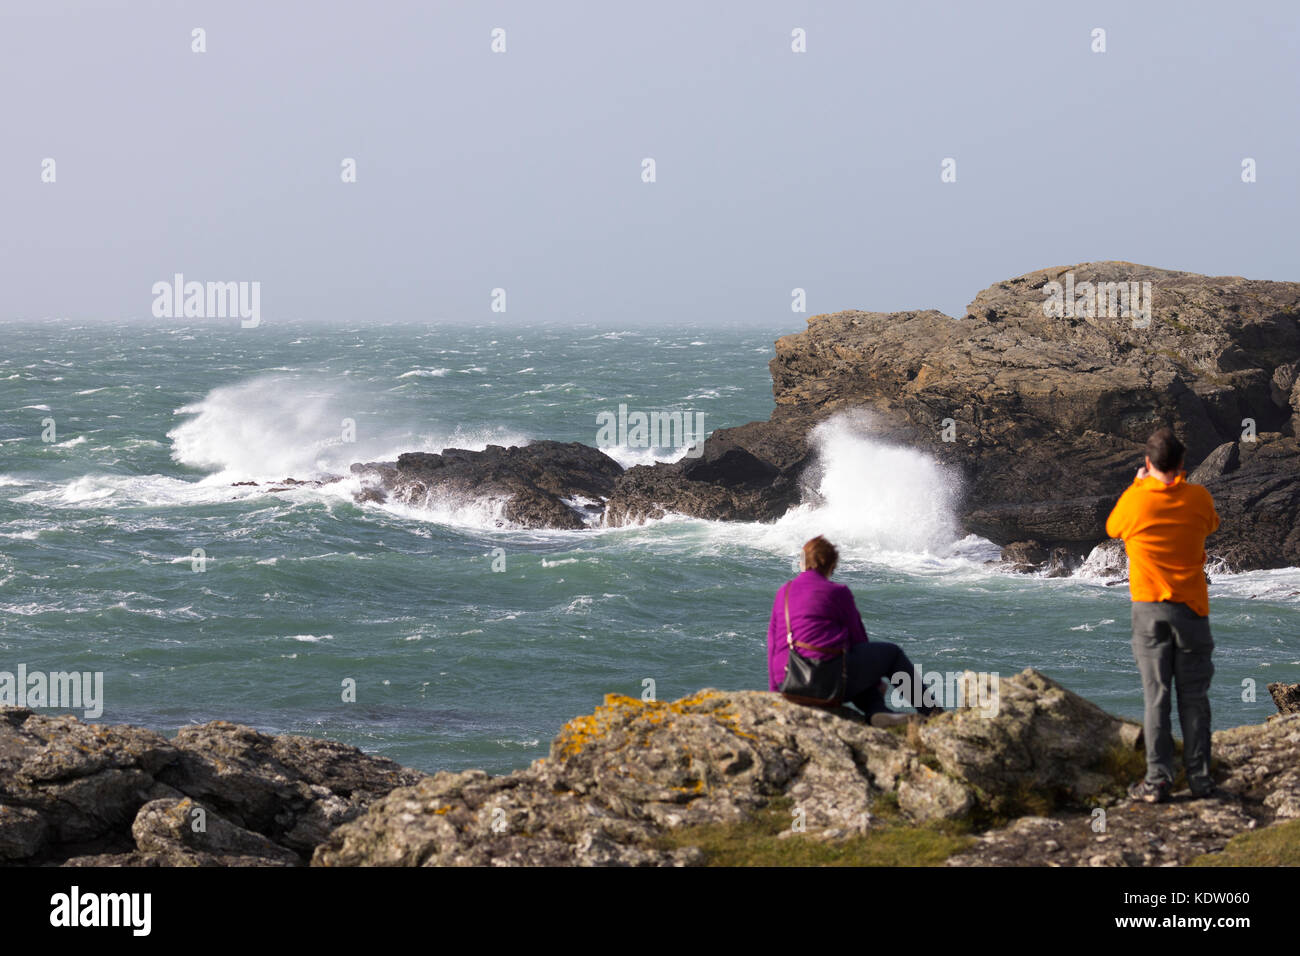 Anglesey, Wales. 16th Oct, 2017. UK Weather.  As forecasted with Yellow and Amber and the more dangerous Red warnings by the Met Office Hurricane Ophelia will begins to make landfall to most western parts of the UK including Wales bring storm weather and sea surges as this couple discovered photographing the waves dangerously close to the sea edge at Treaddur Bay, Anglesey Stock Photo